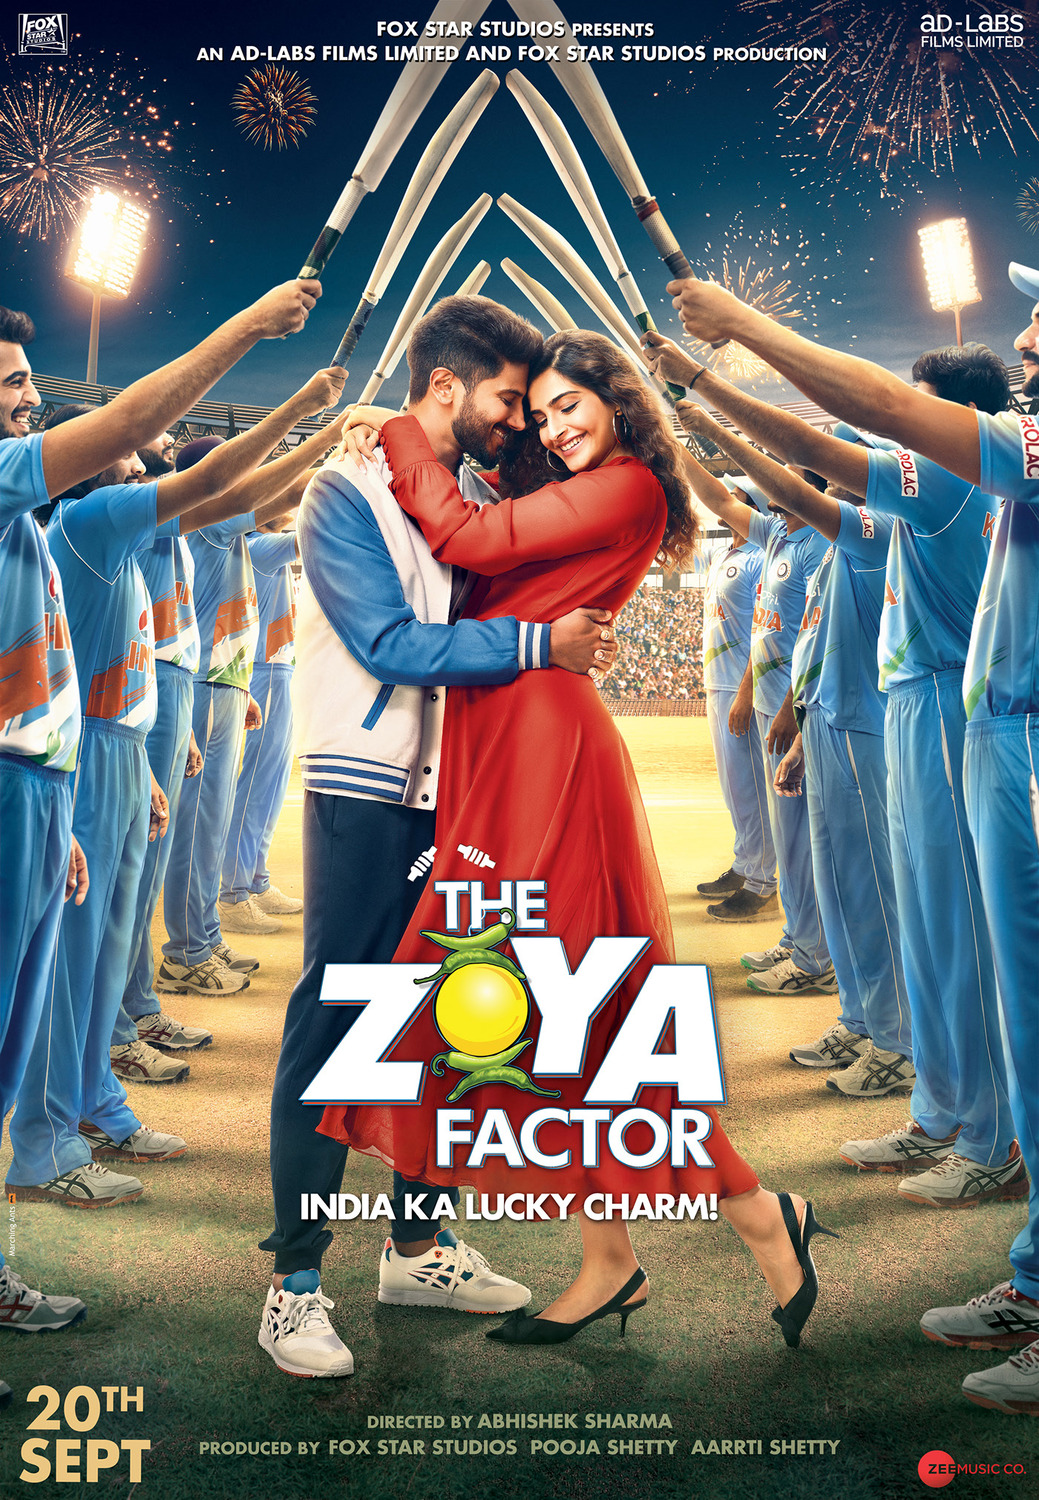 Extra Large Movie Poster Image for The Zoya Factor (#1 of 3)